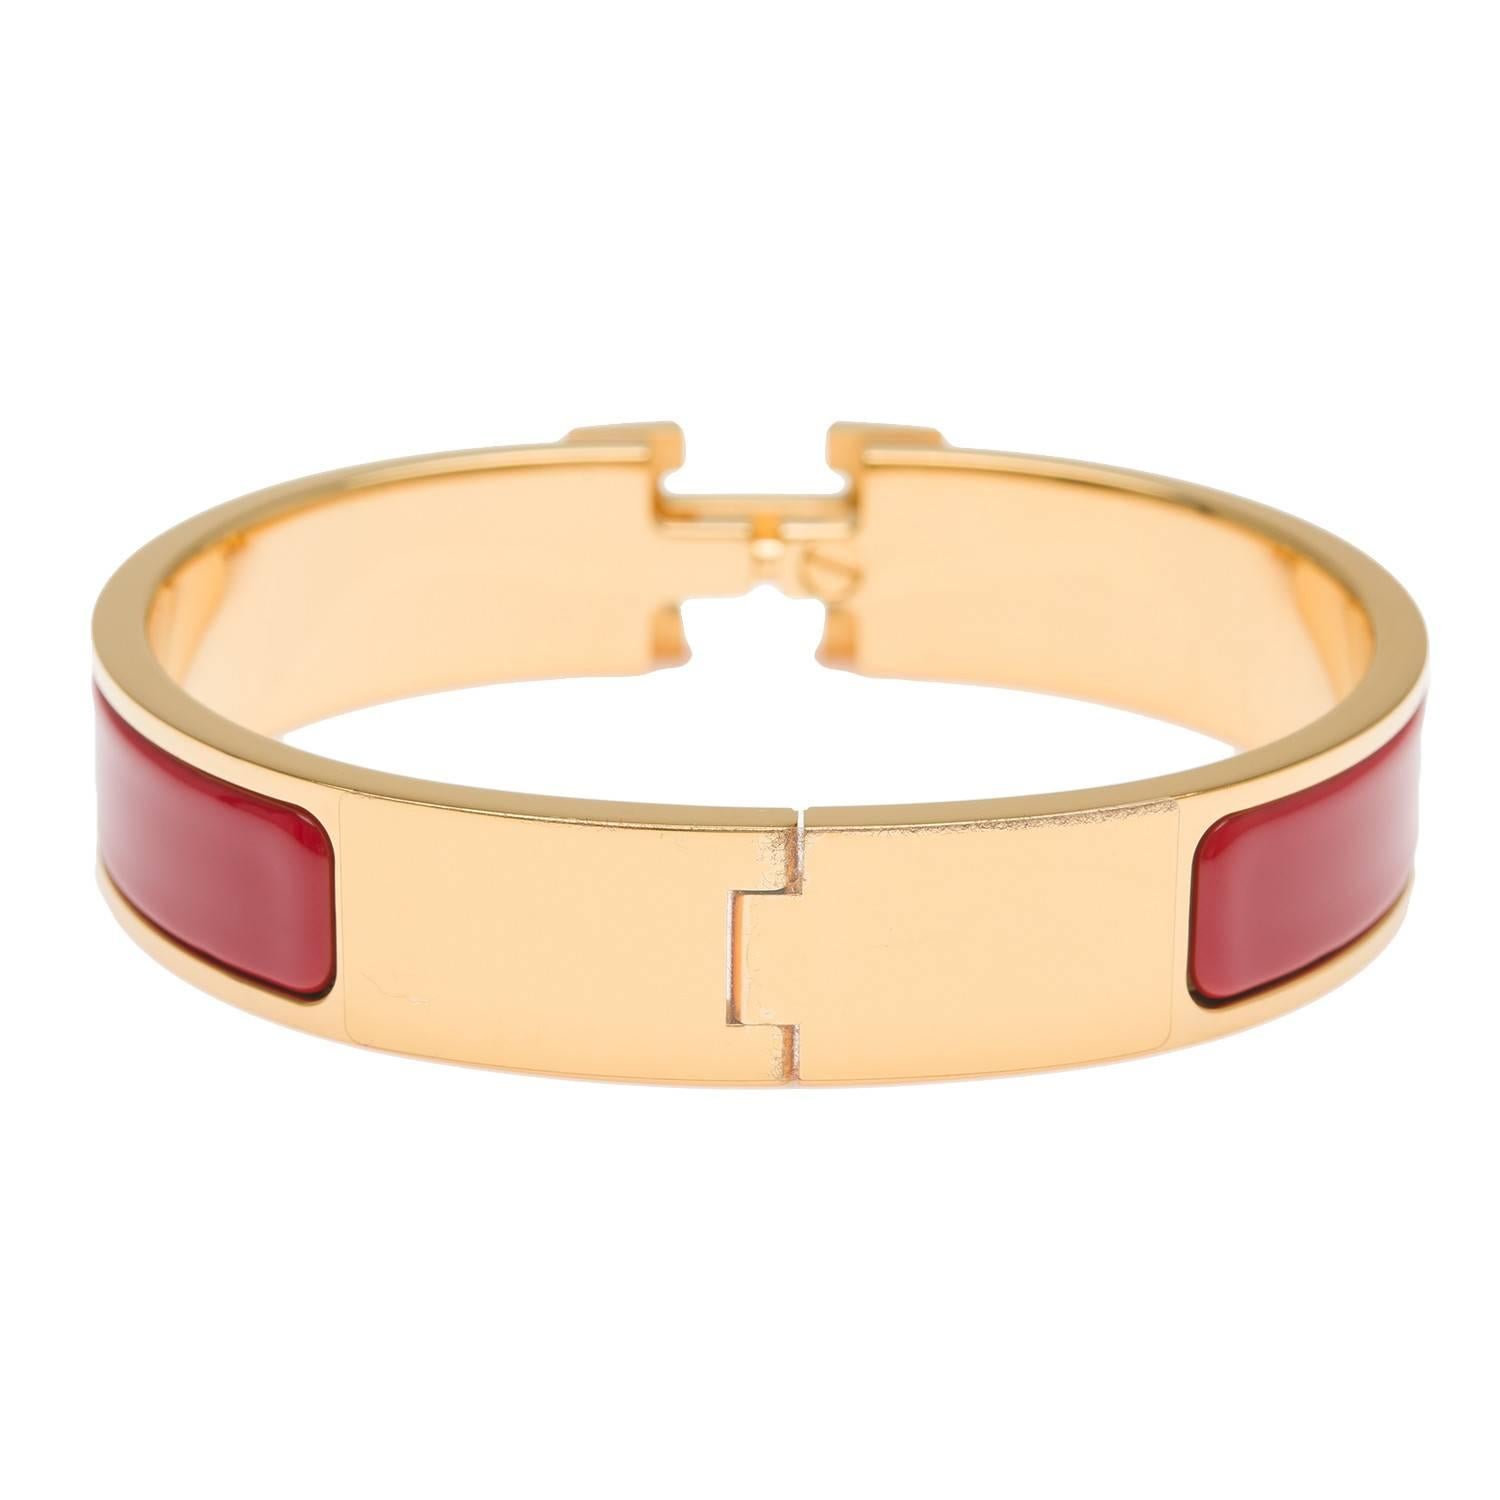 Hermes narrow Clic Clac H bracelet in Amaranth red enamel with gold plated hardware in size PM.

Origin: France

Condition: Pristine; plastic on hardware

Accompanied by: Hermes box, dustbag

Measurements: Diameter: 2.25